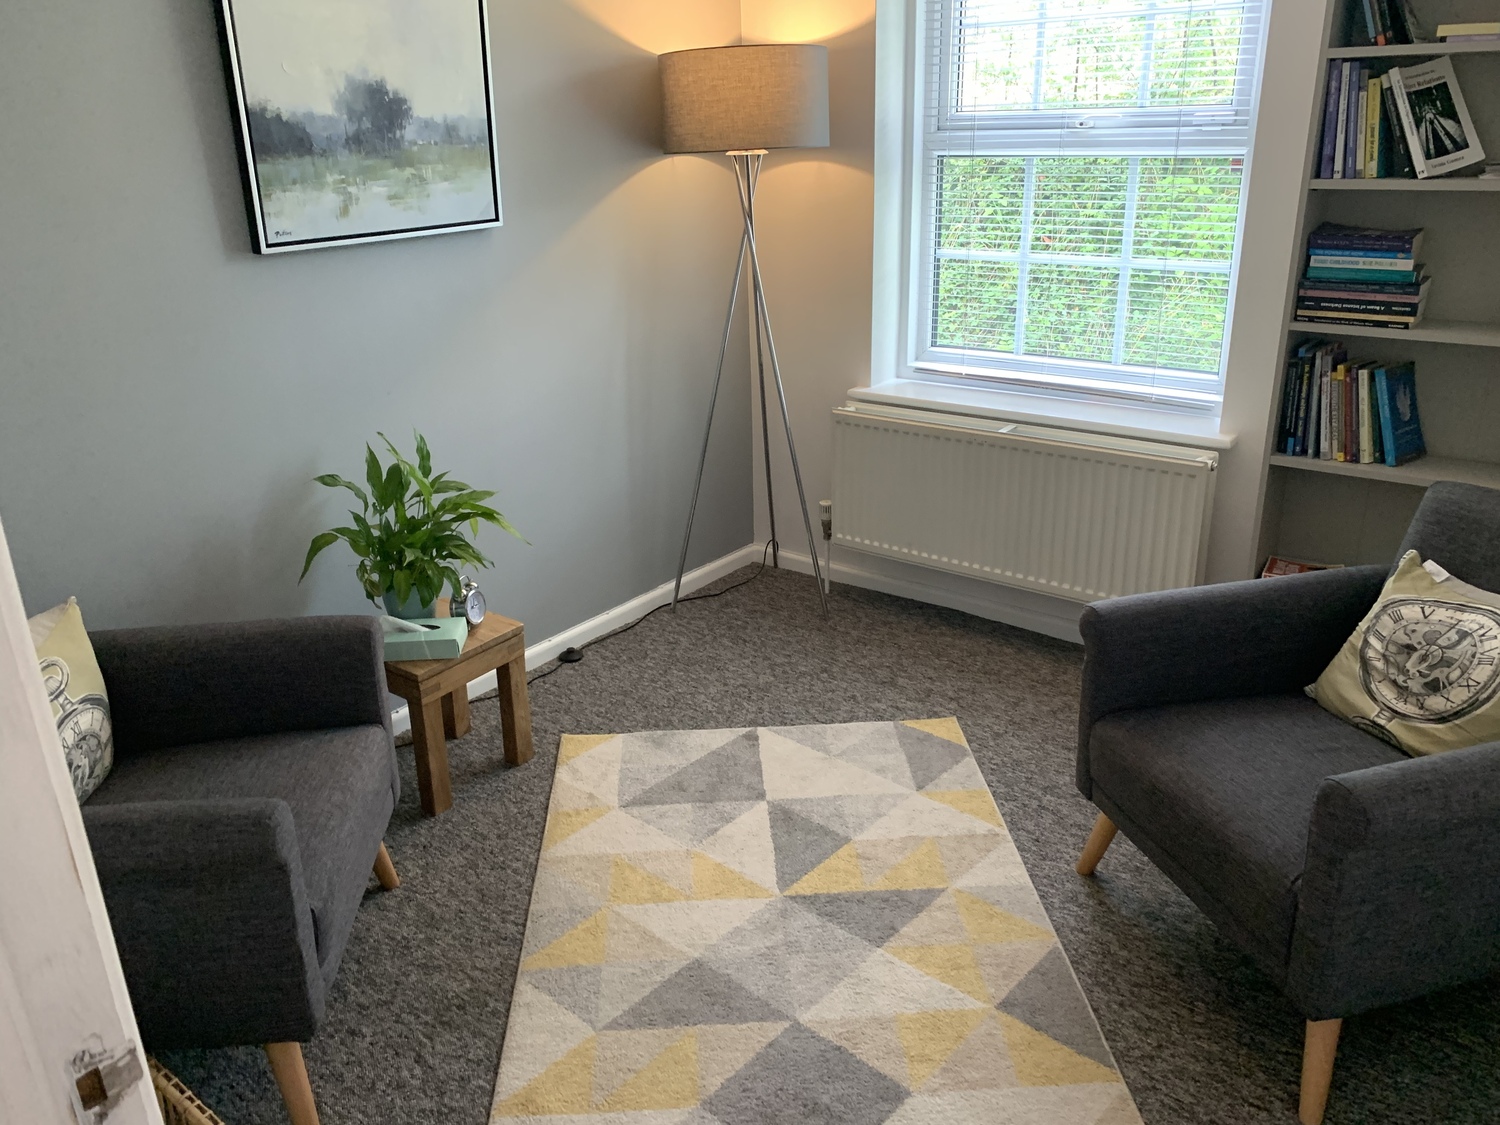 Gallery Photo of Room at Stortford Therapy Space